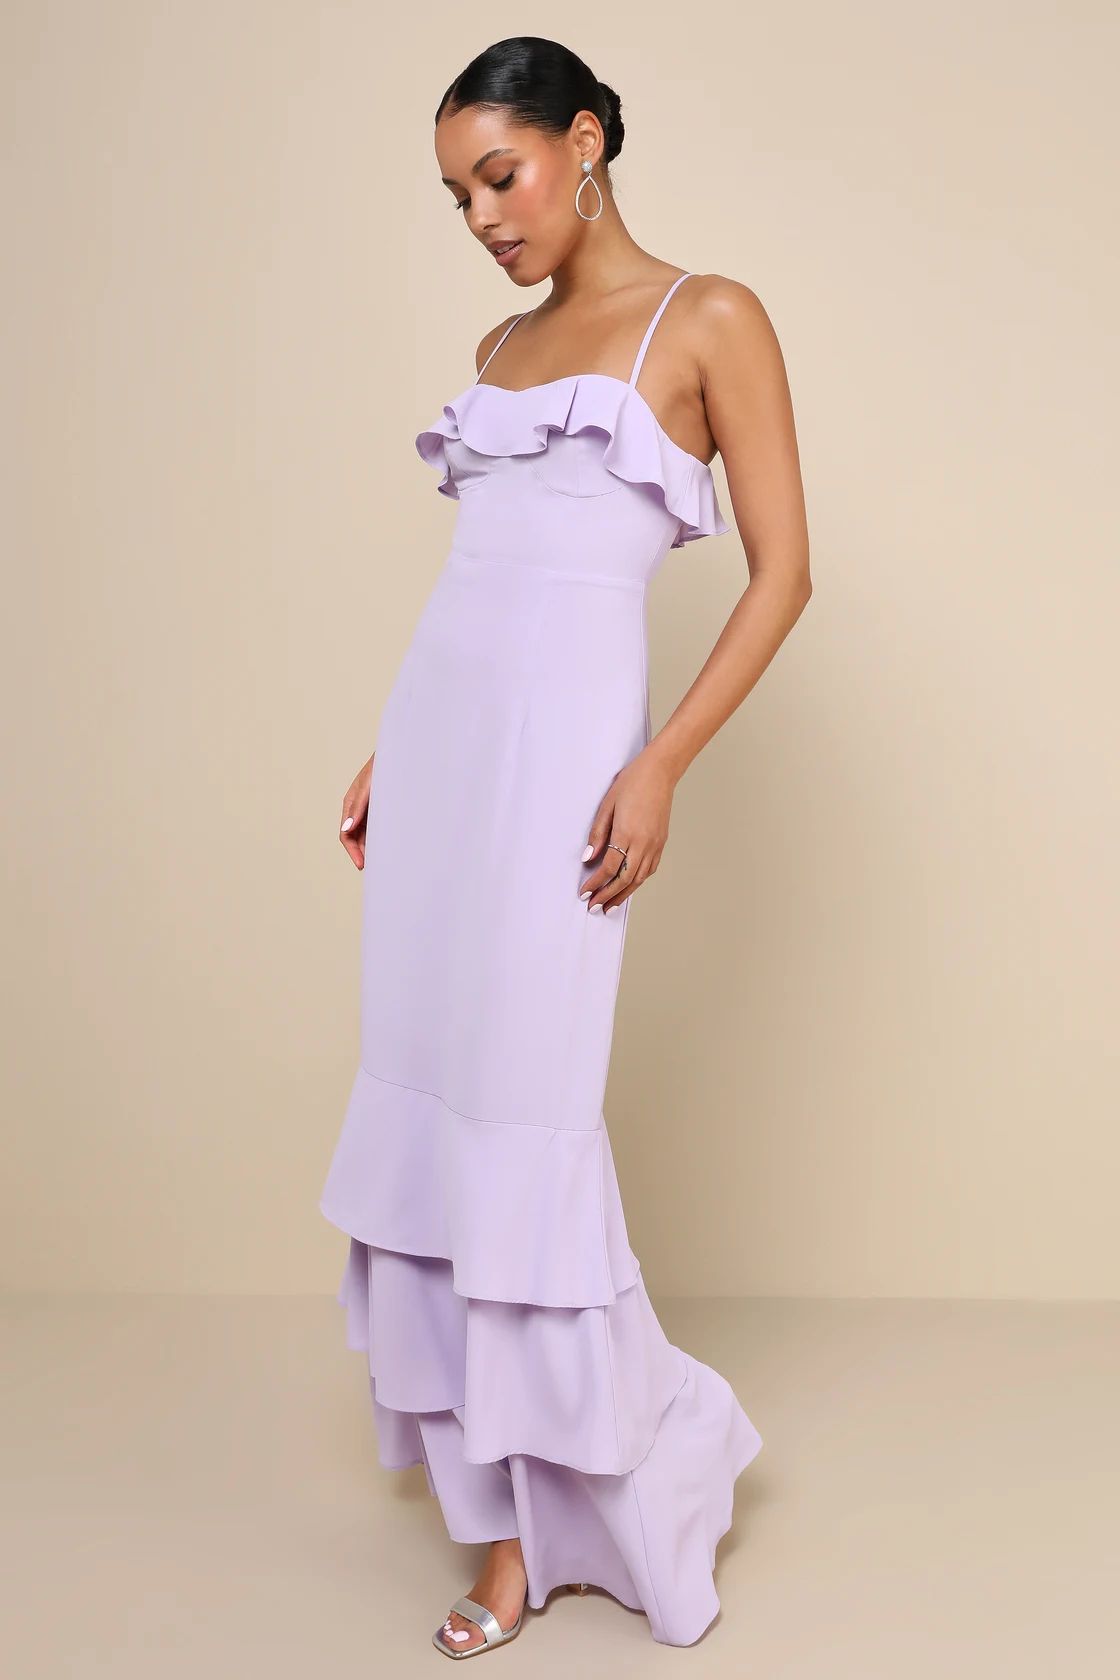 Lively Evenings Lavender Sleeveless Tiered Maxi Dress | Lulus